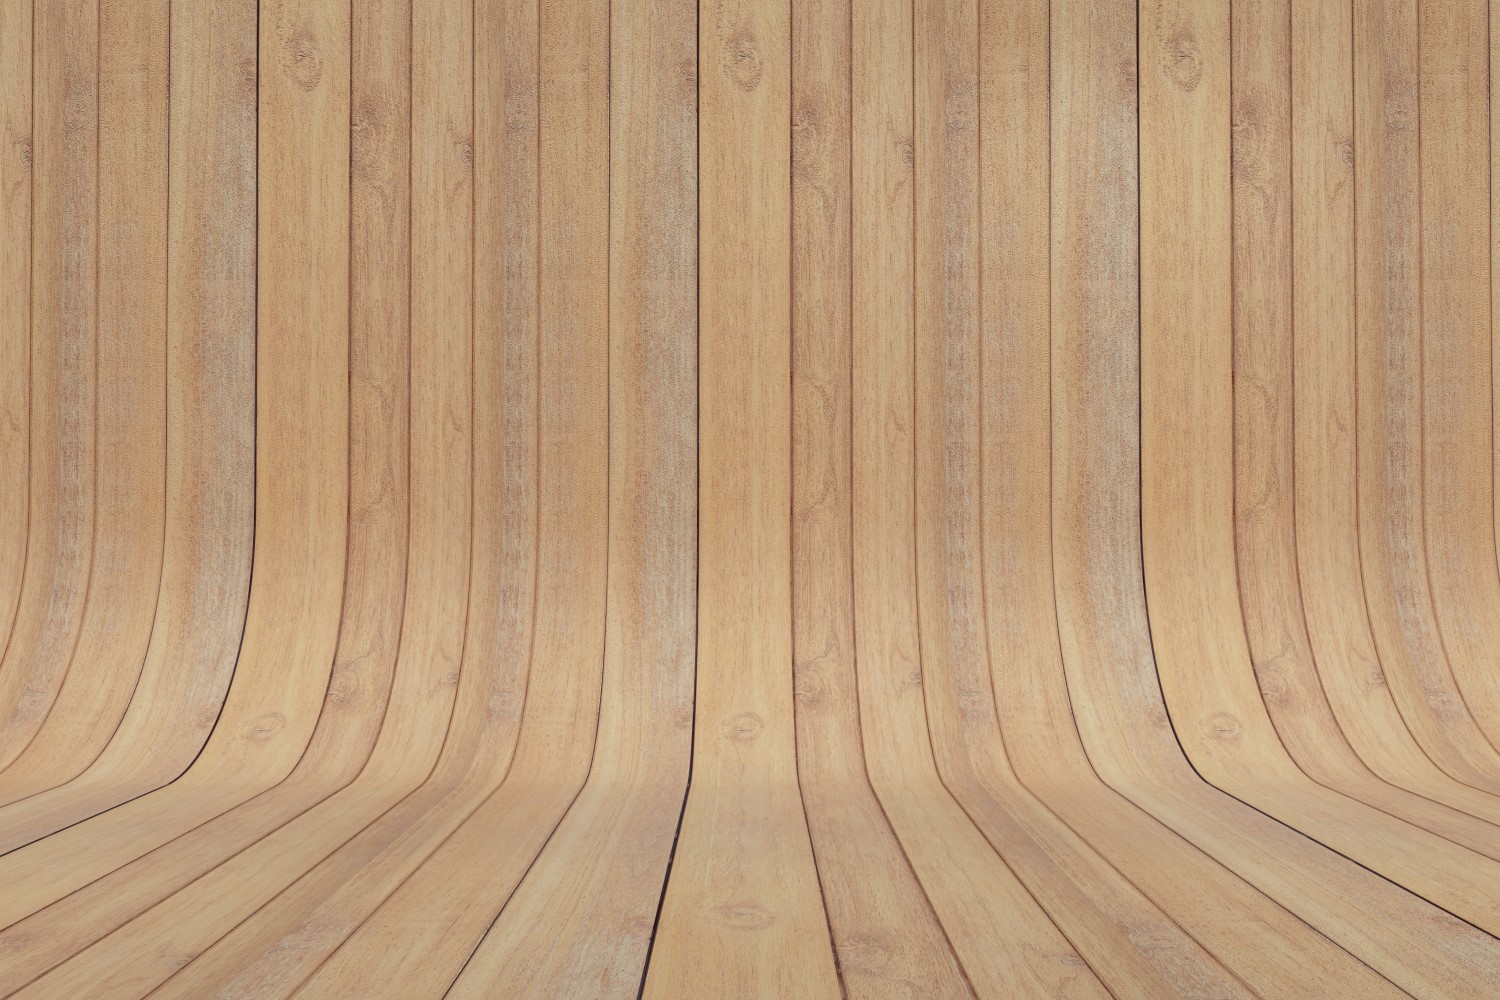 Curved Light Brown Wood Parquet background .